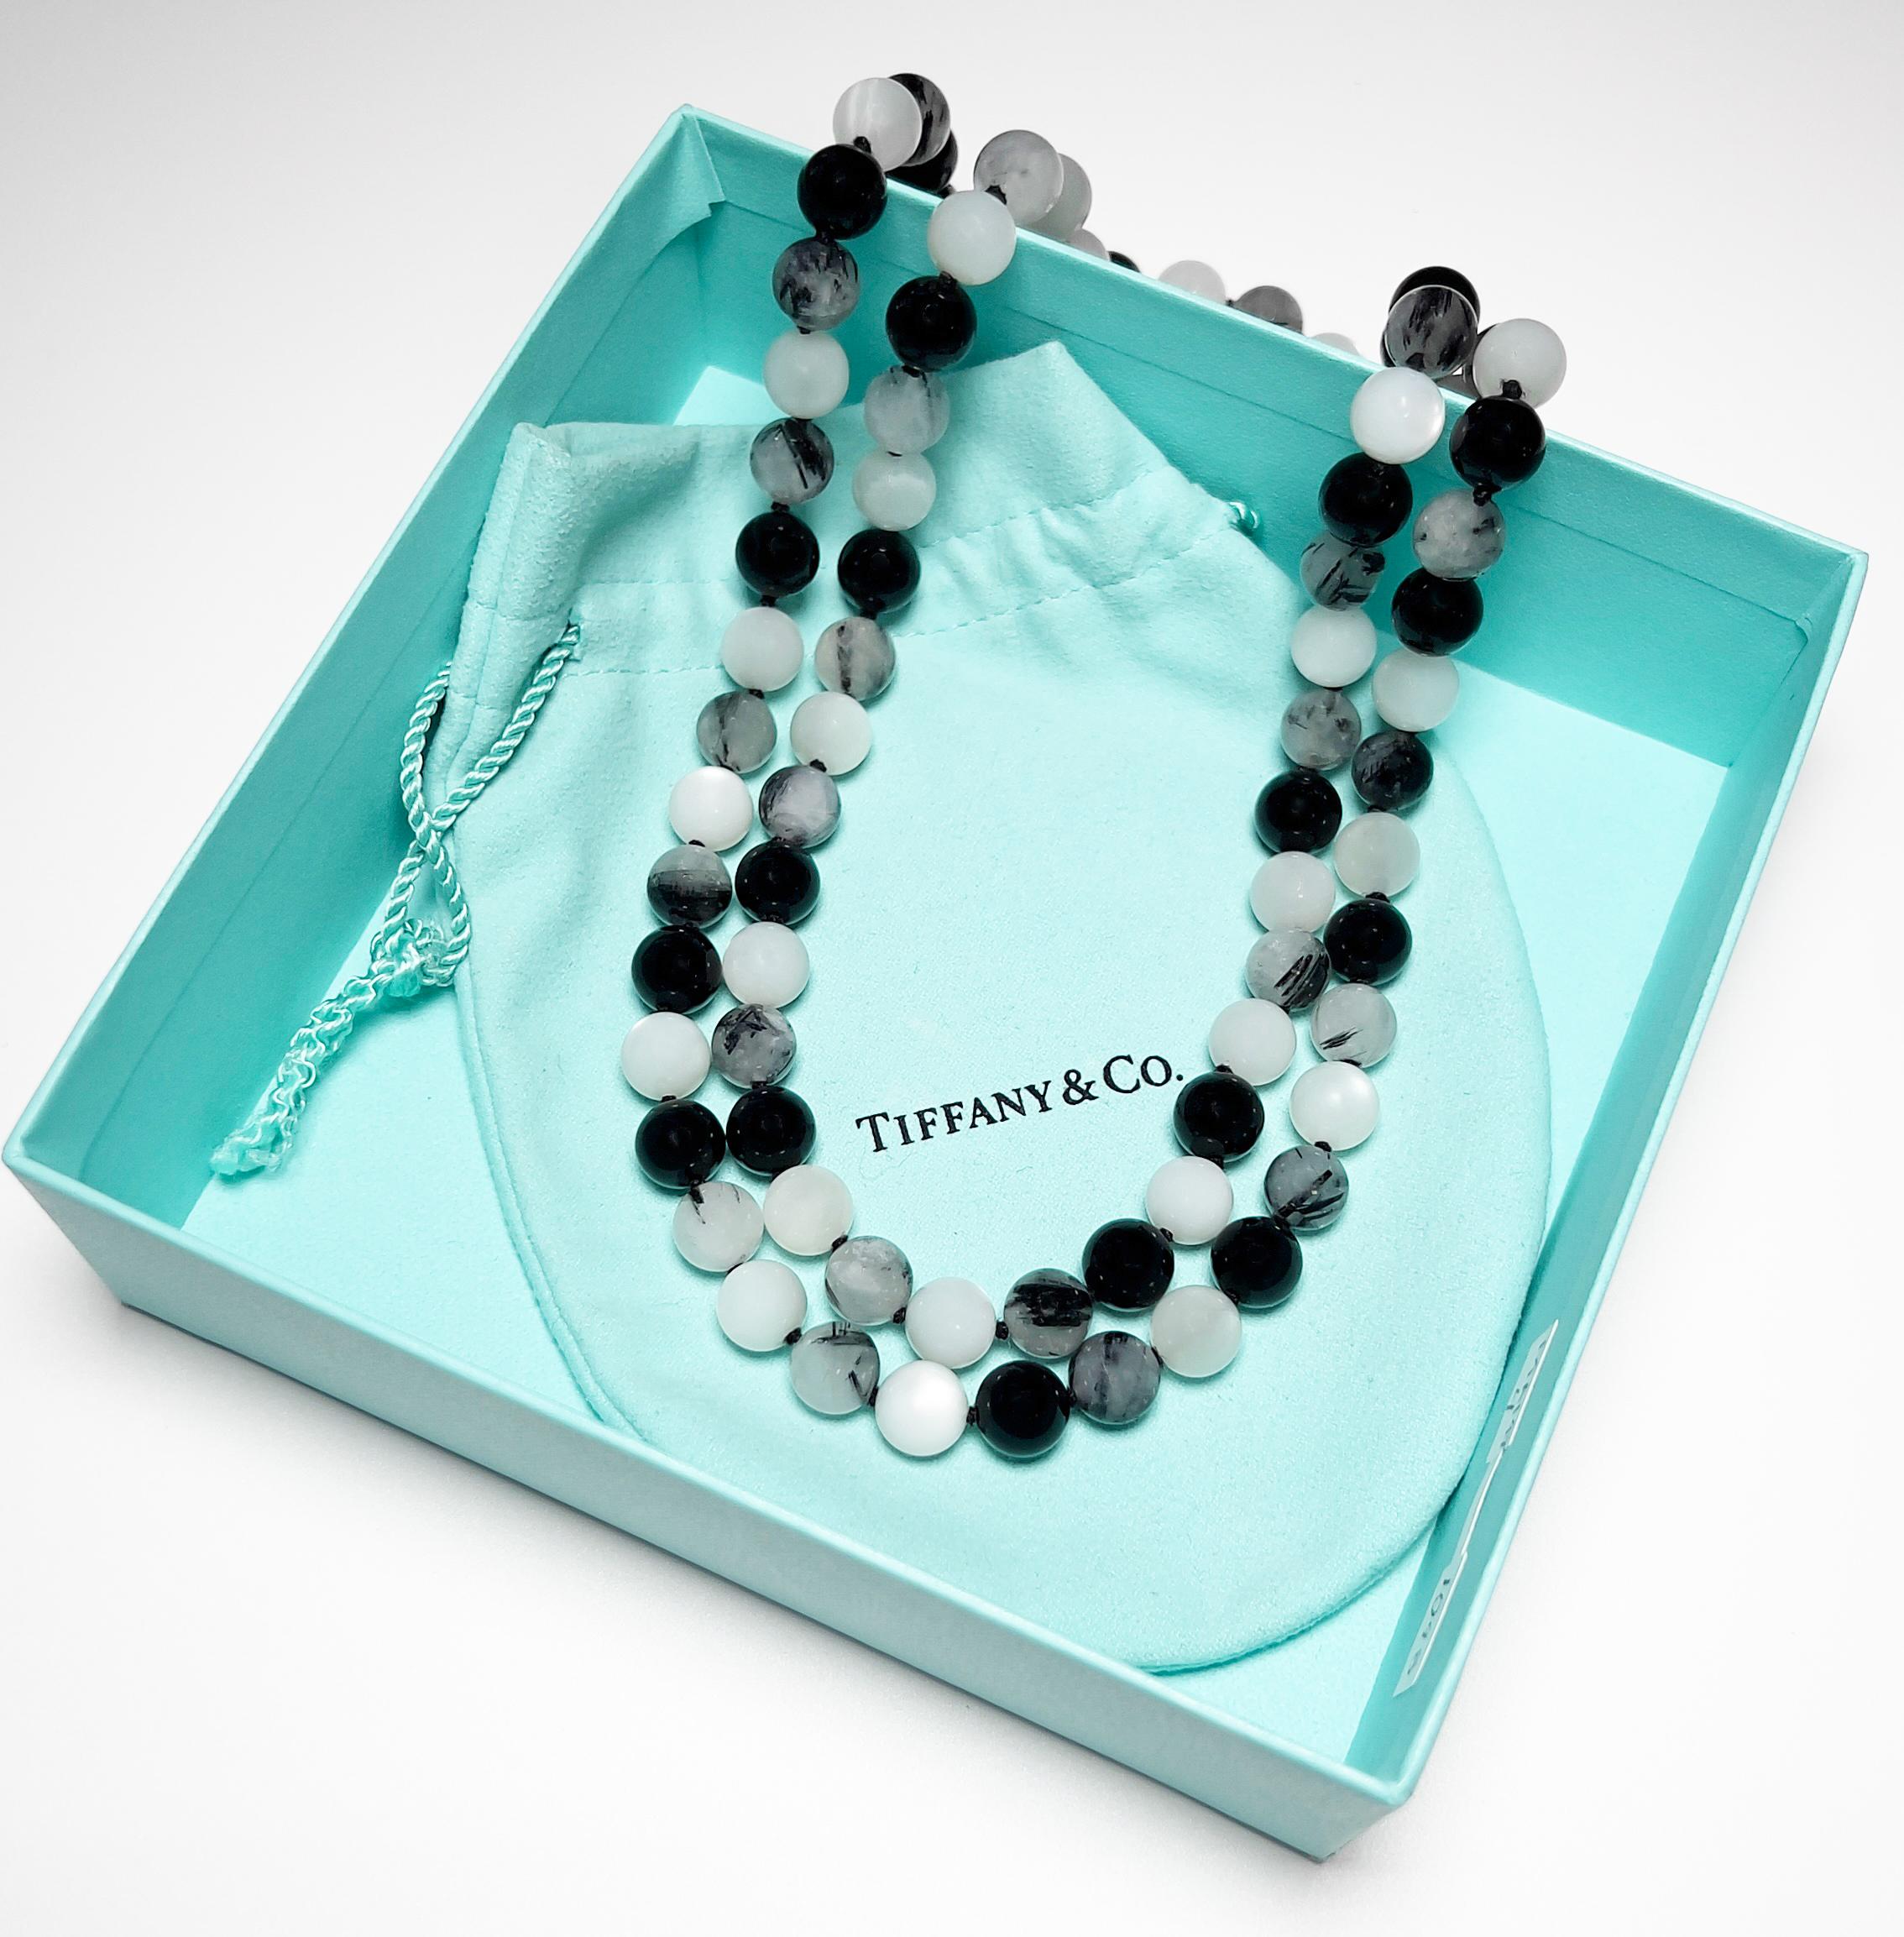 It comes with the Authenticity Certificate by GIA GG/AJP
Original Box and Pouch Included
Brand: Tiffany & Co.
Collection: Paloma Picasso
Gemstones: Moonstone, Onyx, Quartz
Cut: Round Beads
Diameter: 10 mm
Metal: Silver
Necklace Length: 36 inches